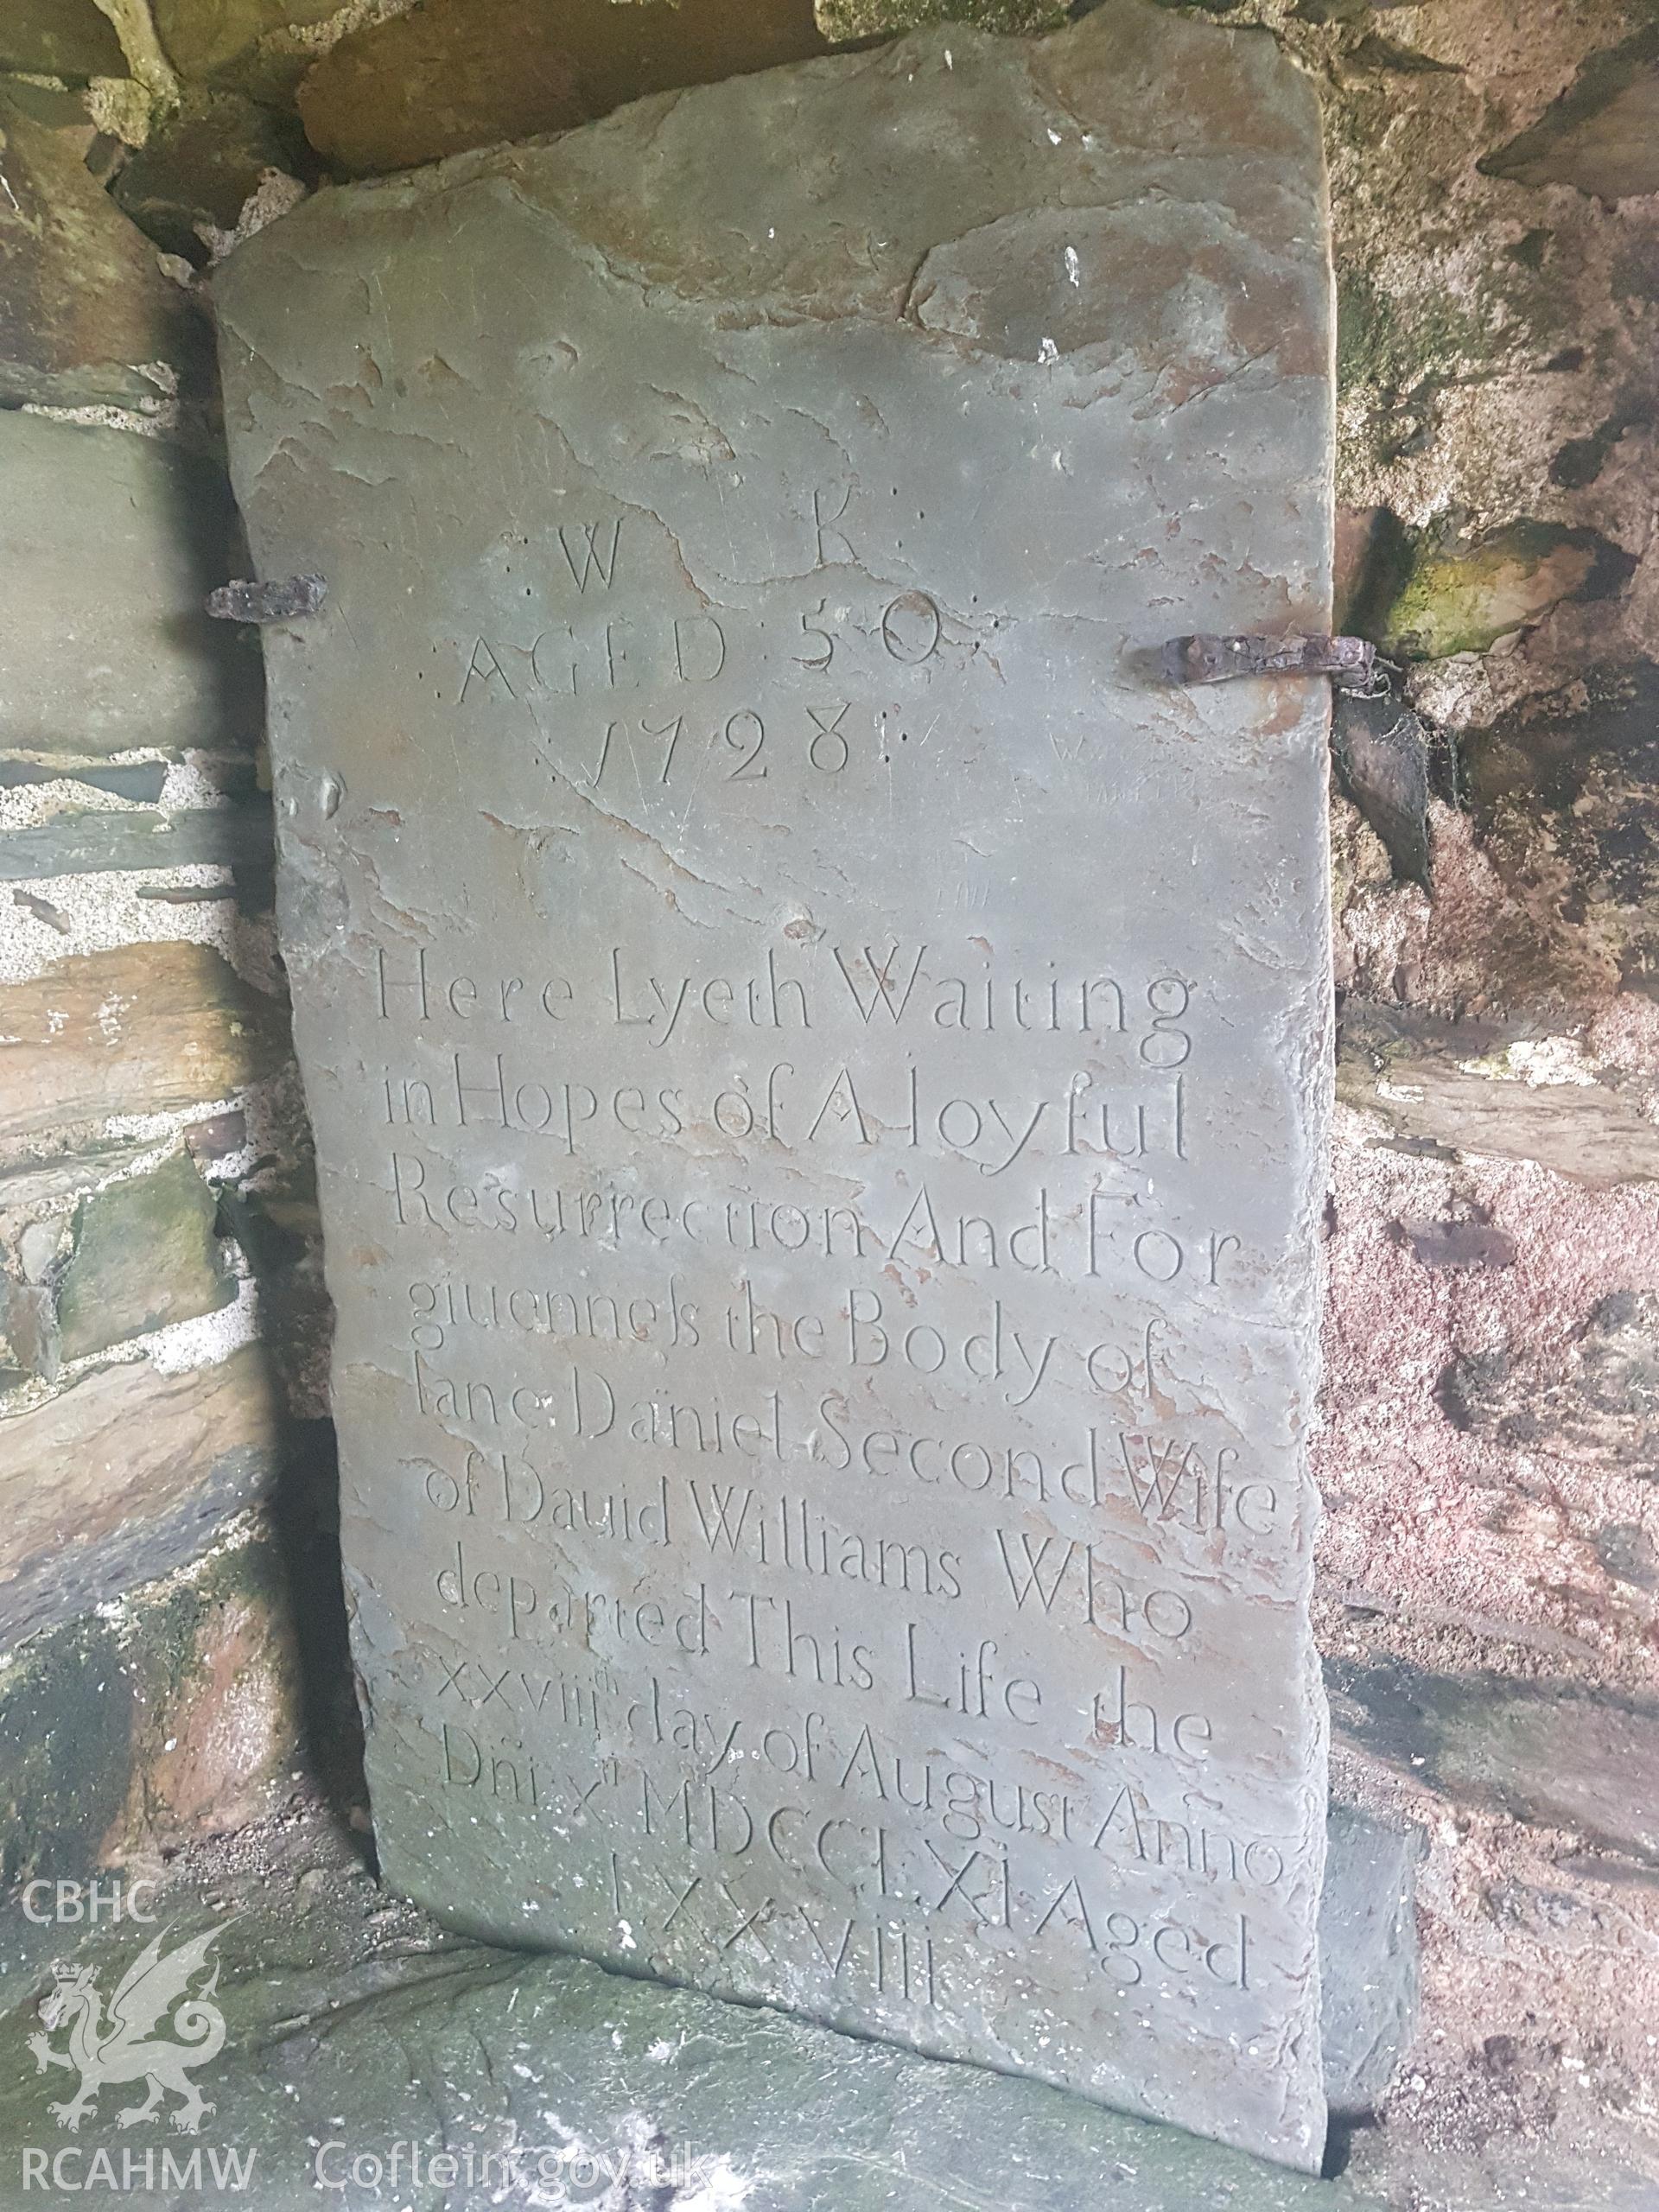 Gravestone in lychgate dated 1728 of Jane Daniel. Photographed by Helen Rowe of RCAHMW on 10th October 2020.